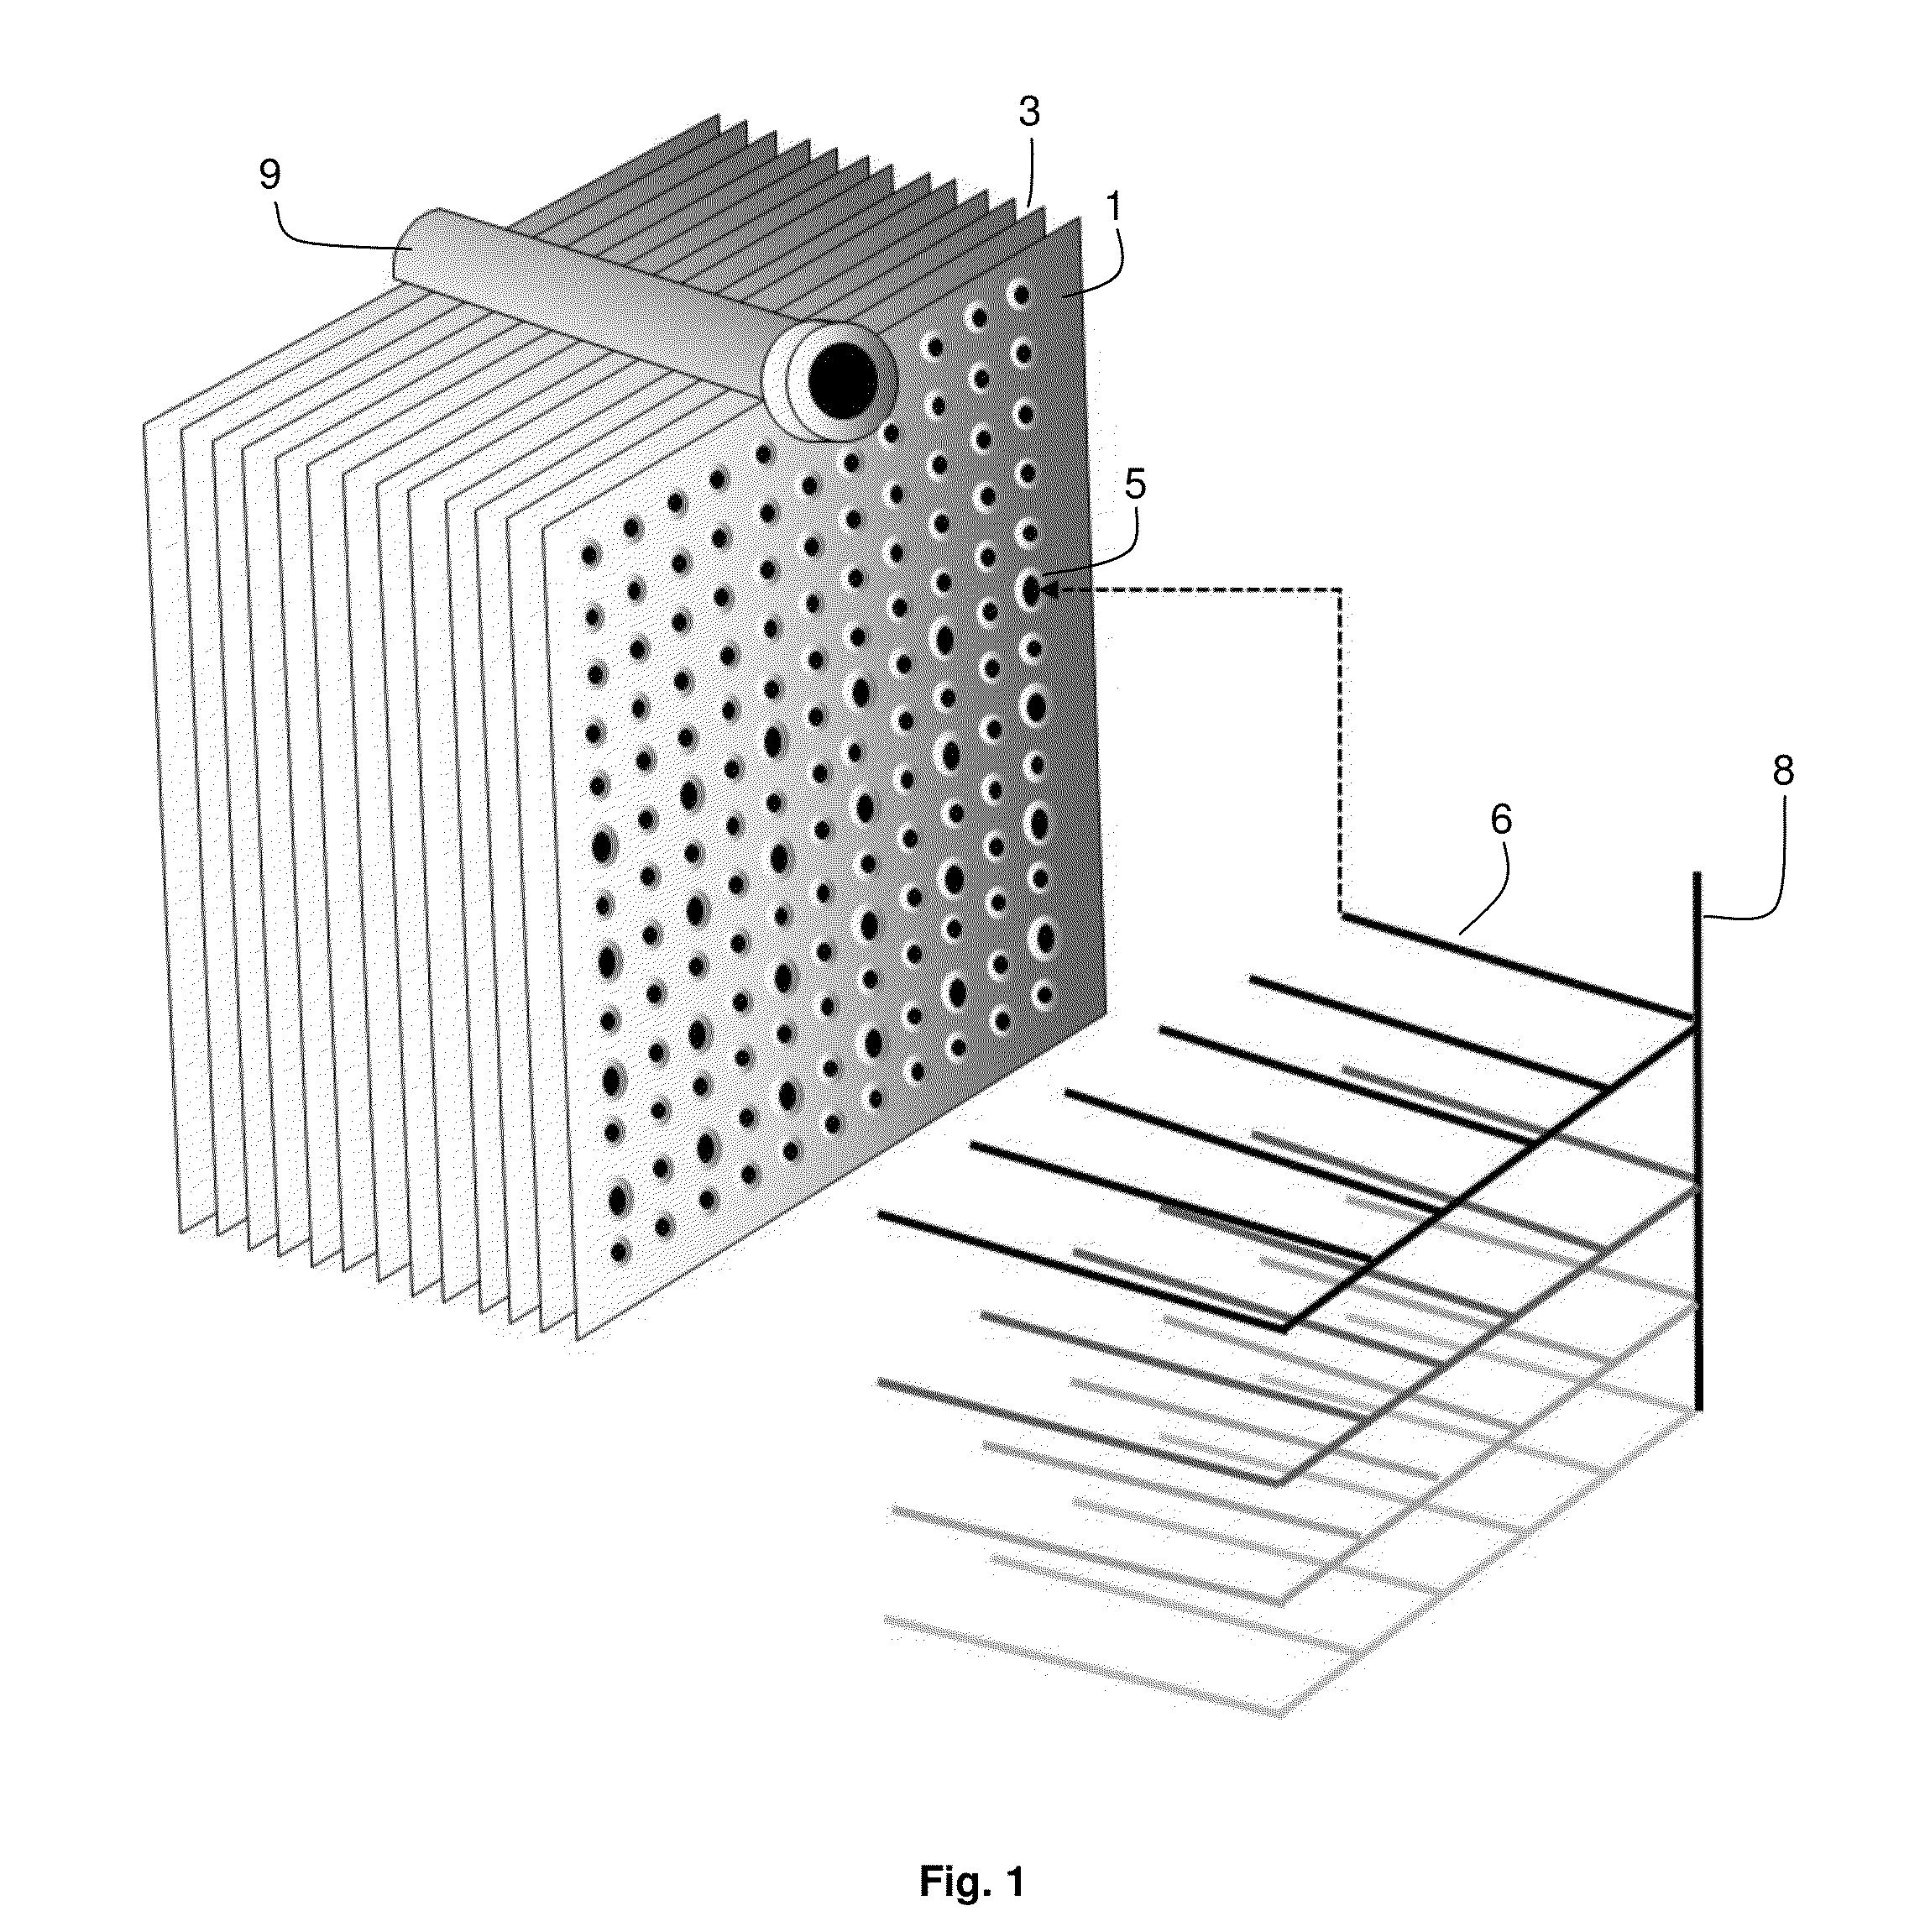 Plate-type reactor with in-situ injection